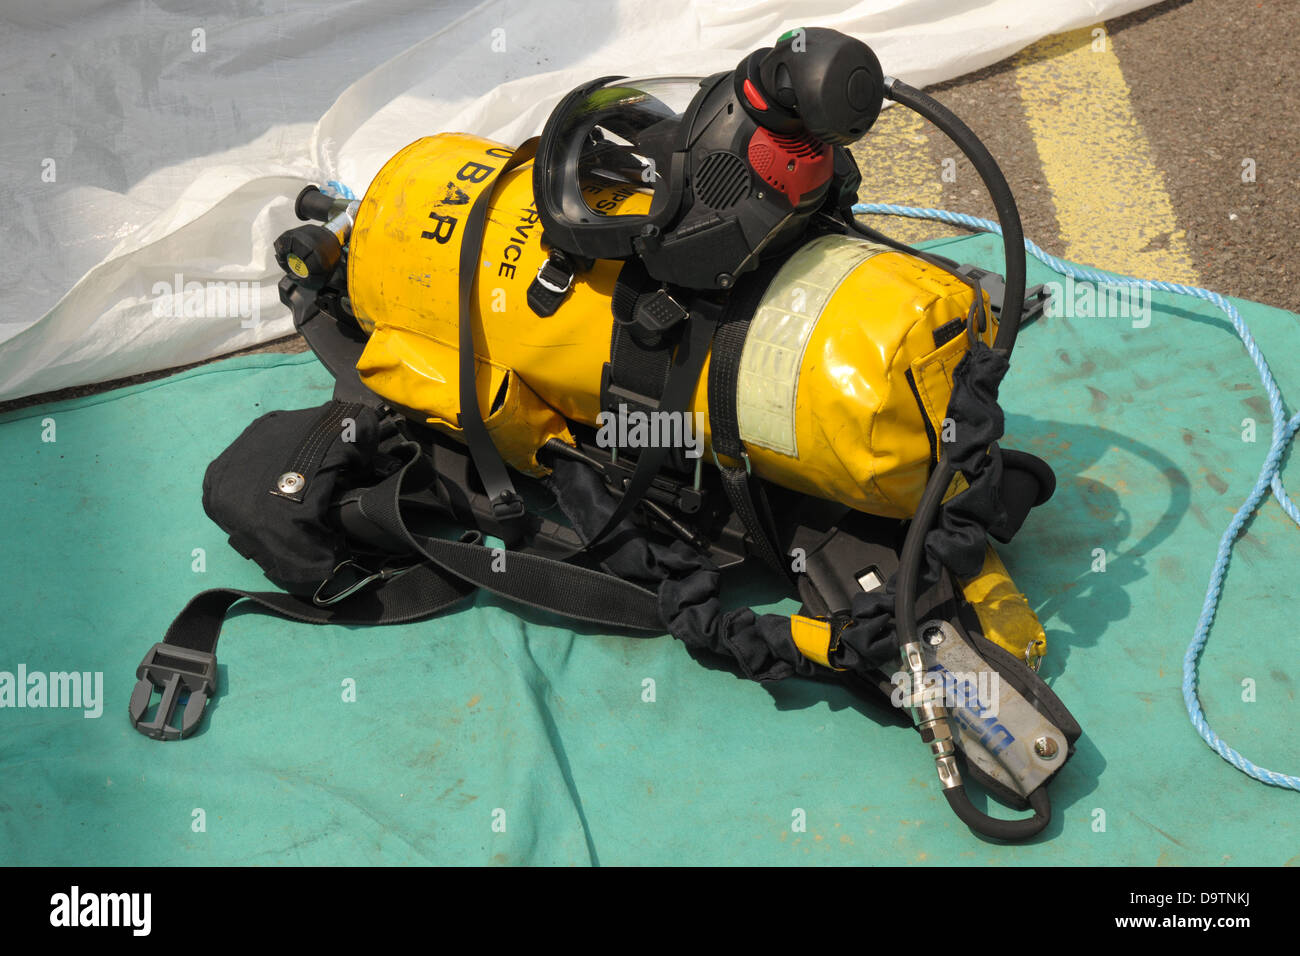 Firefighter's breathing apparatus at the scene of an accident. Stock Photo